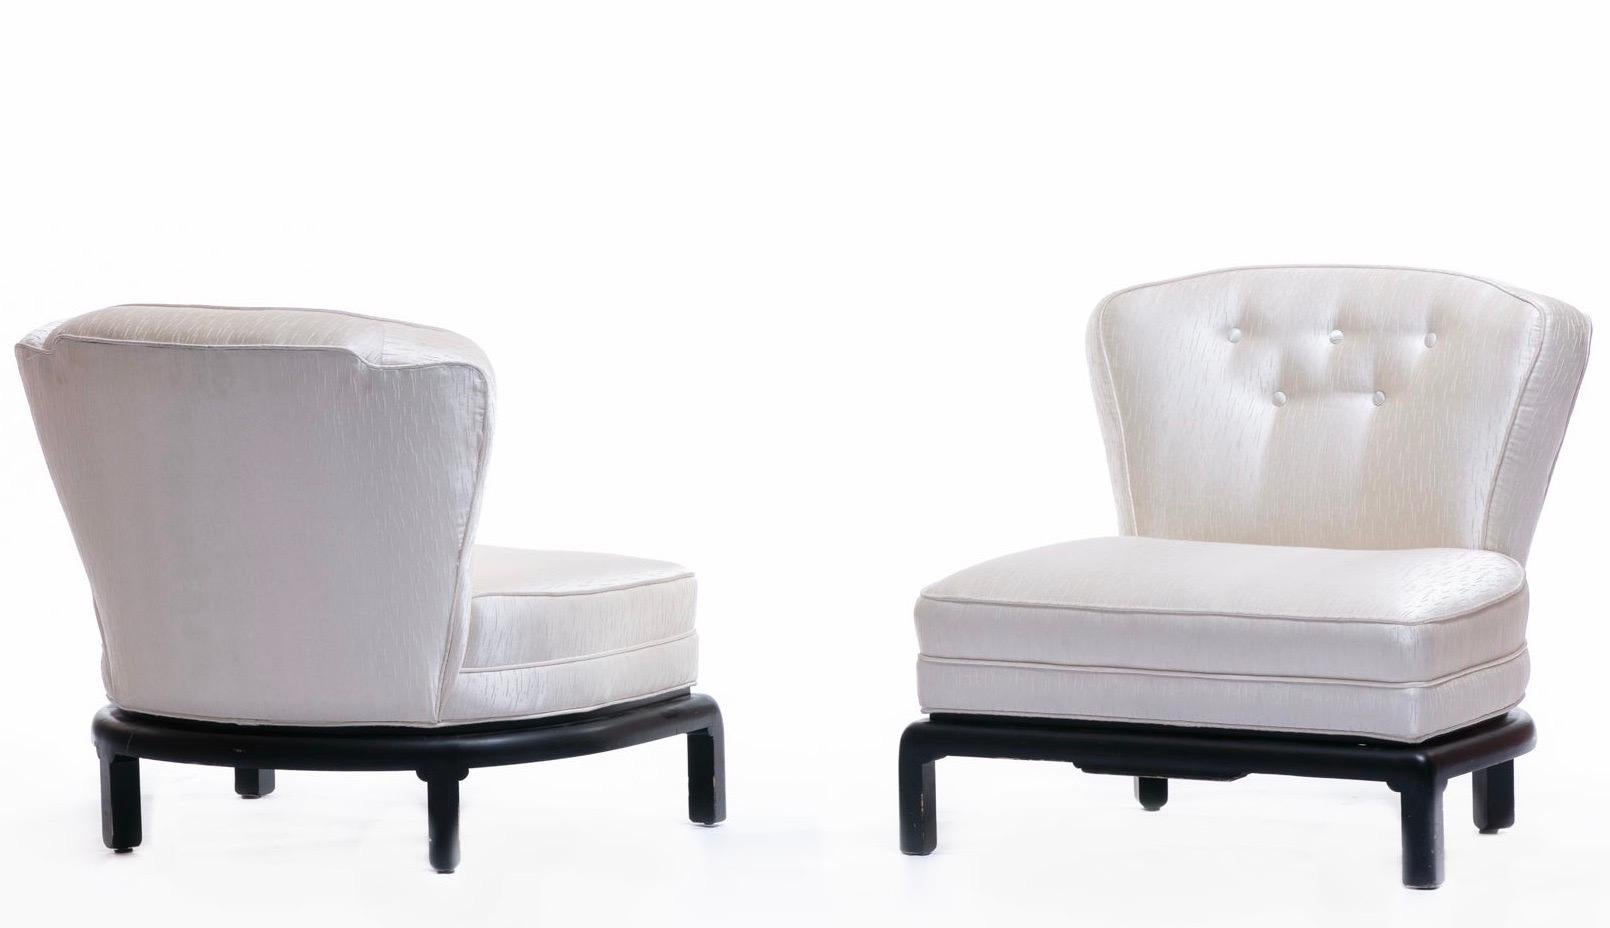 American Baker Ivory Satin Slipper Chairs Attributed to Michael Taylor, circa 1950s, Pair For Sale